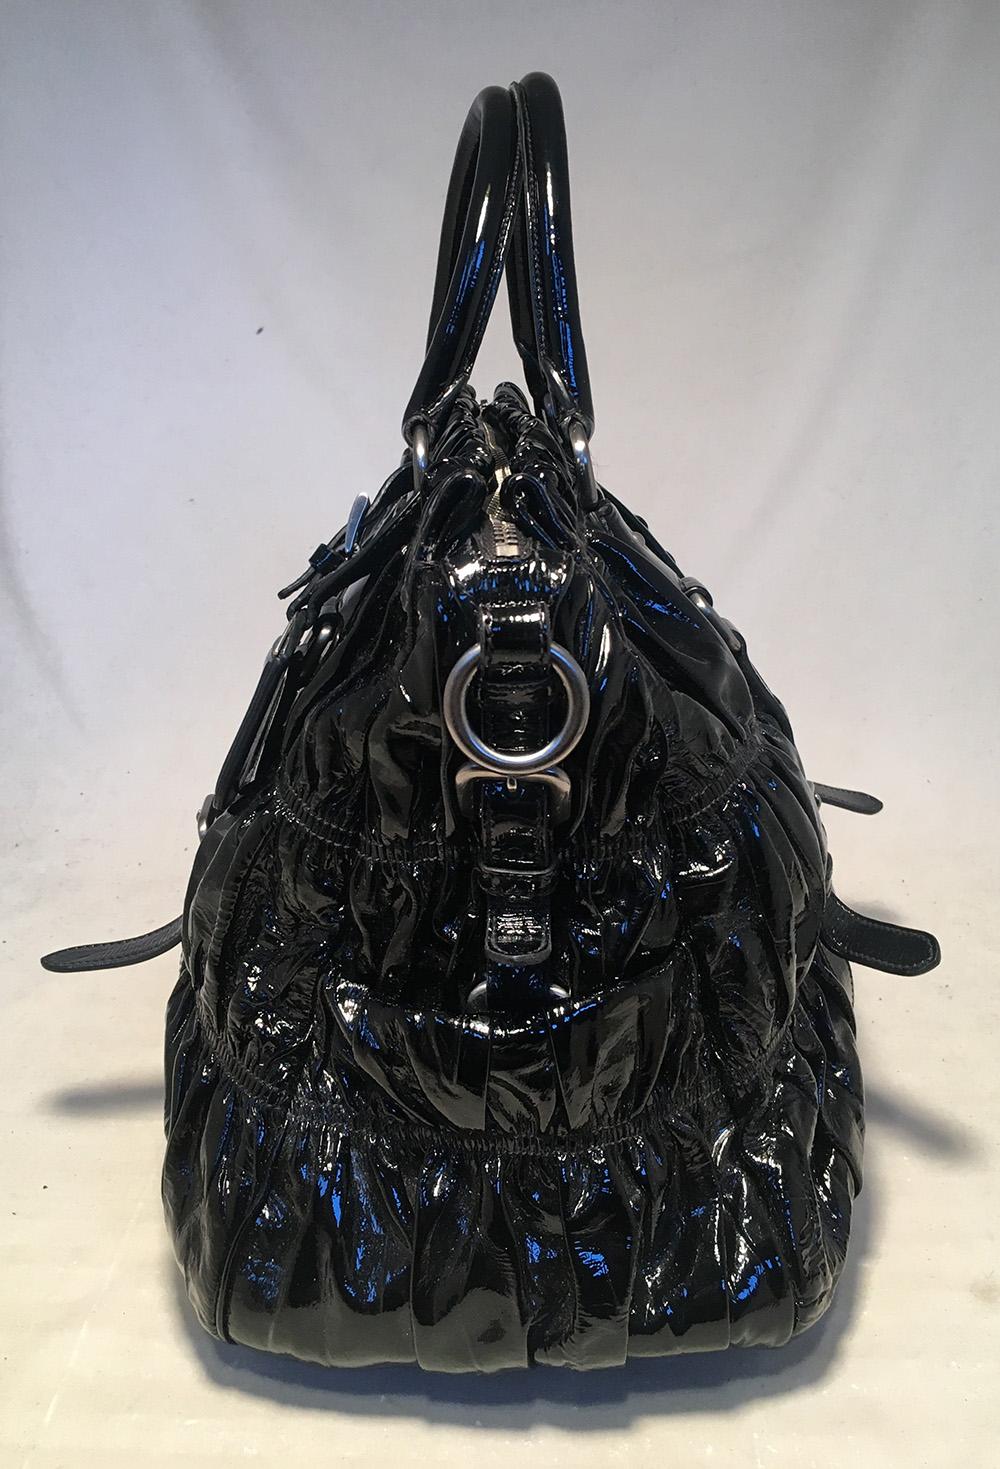 Prada Black Patent Leather Gaufre Ruched Shoulder Bag Tote in excellent condition. Black patent leather exterior in signature ruched gaufre style trimmed with silver hardware and removable nappa leather shoulder strap. Luggage tag attached at end of